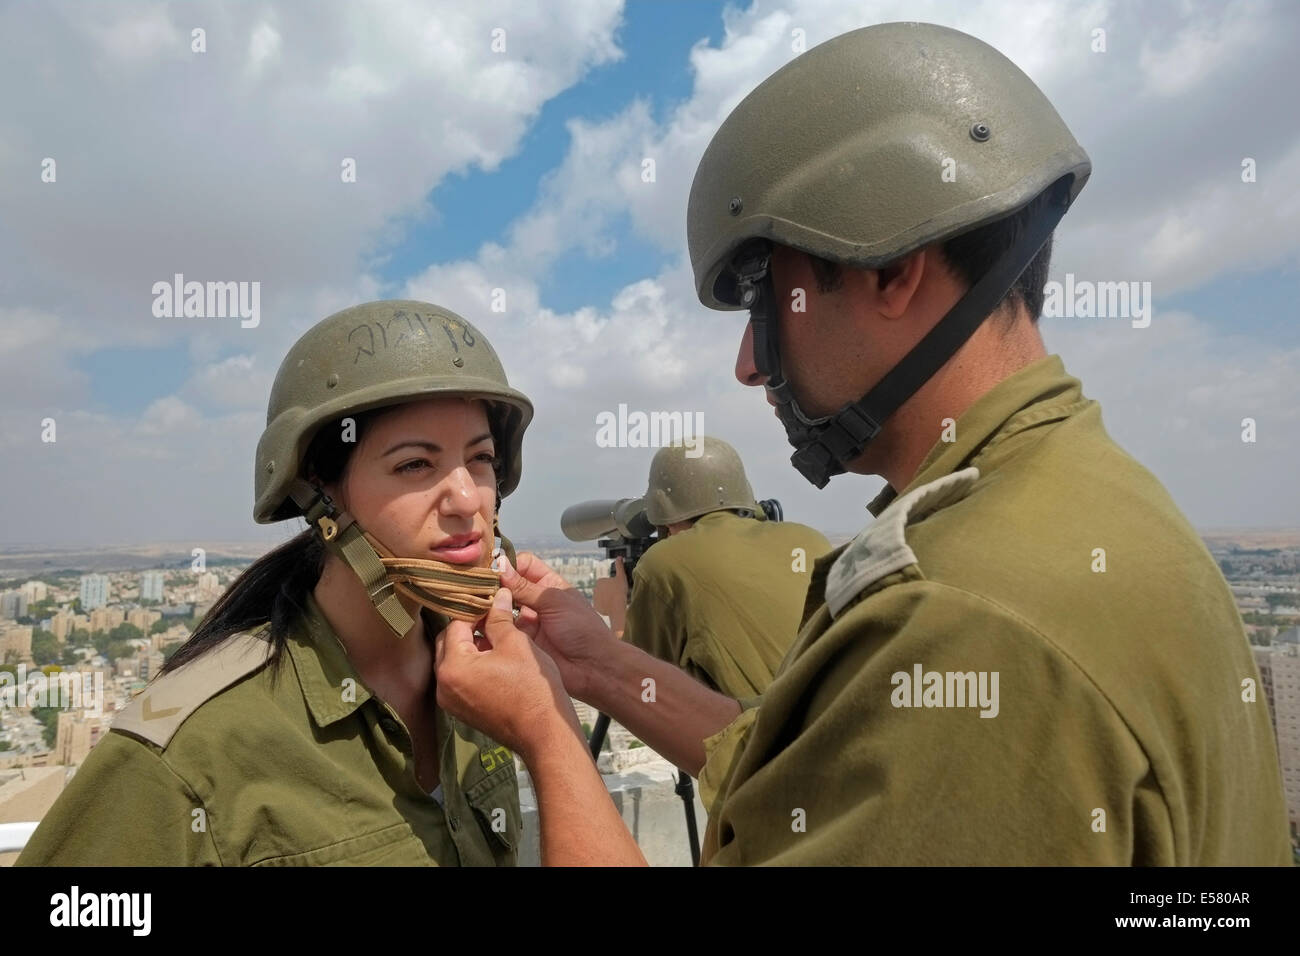 israeli-female-soldier-from-the-field-intelligence-corps-prepare-to-E580AR.jpg